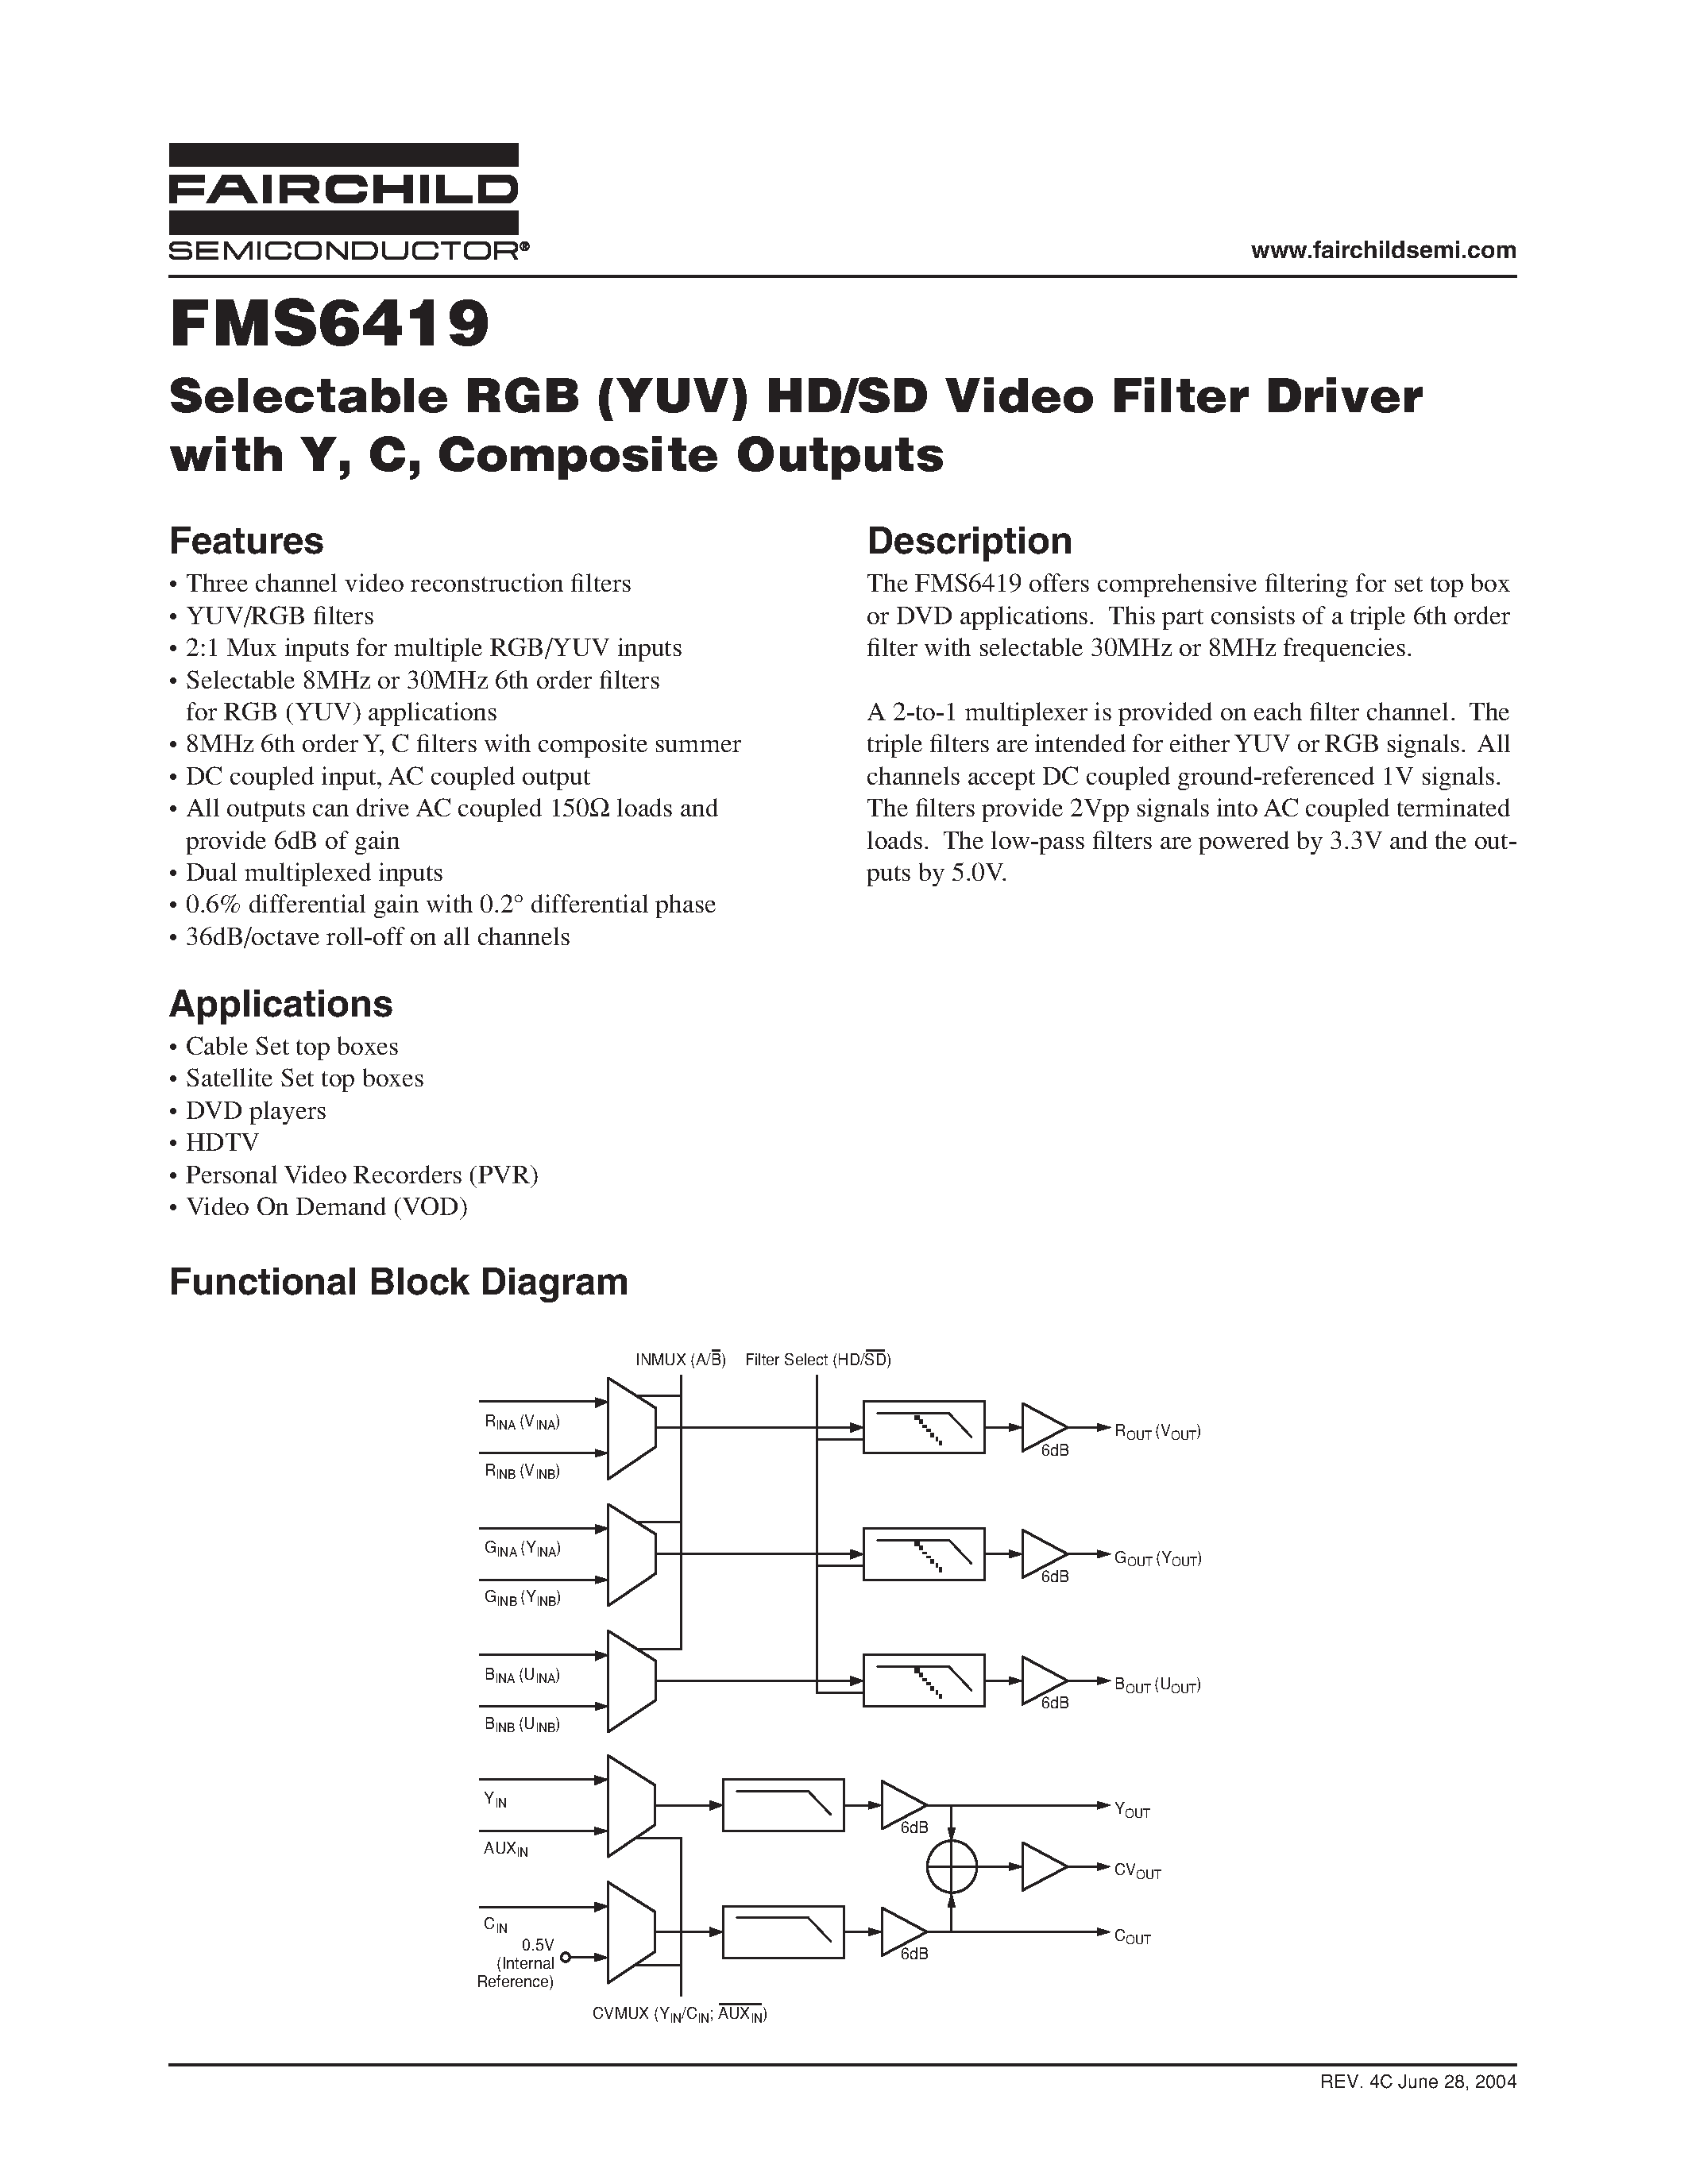 Datasheet FMS6419 - Selectable RGB (YUV) HD/SD Video Filter Driver with Y/ C/ Composite Outputs page 1